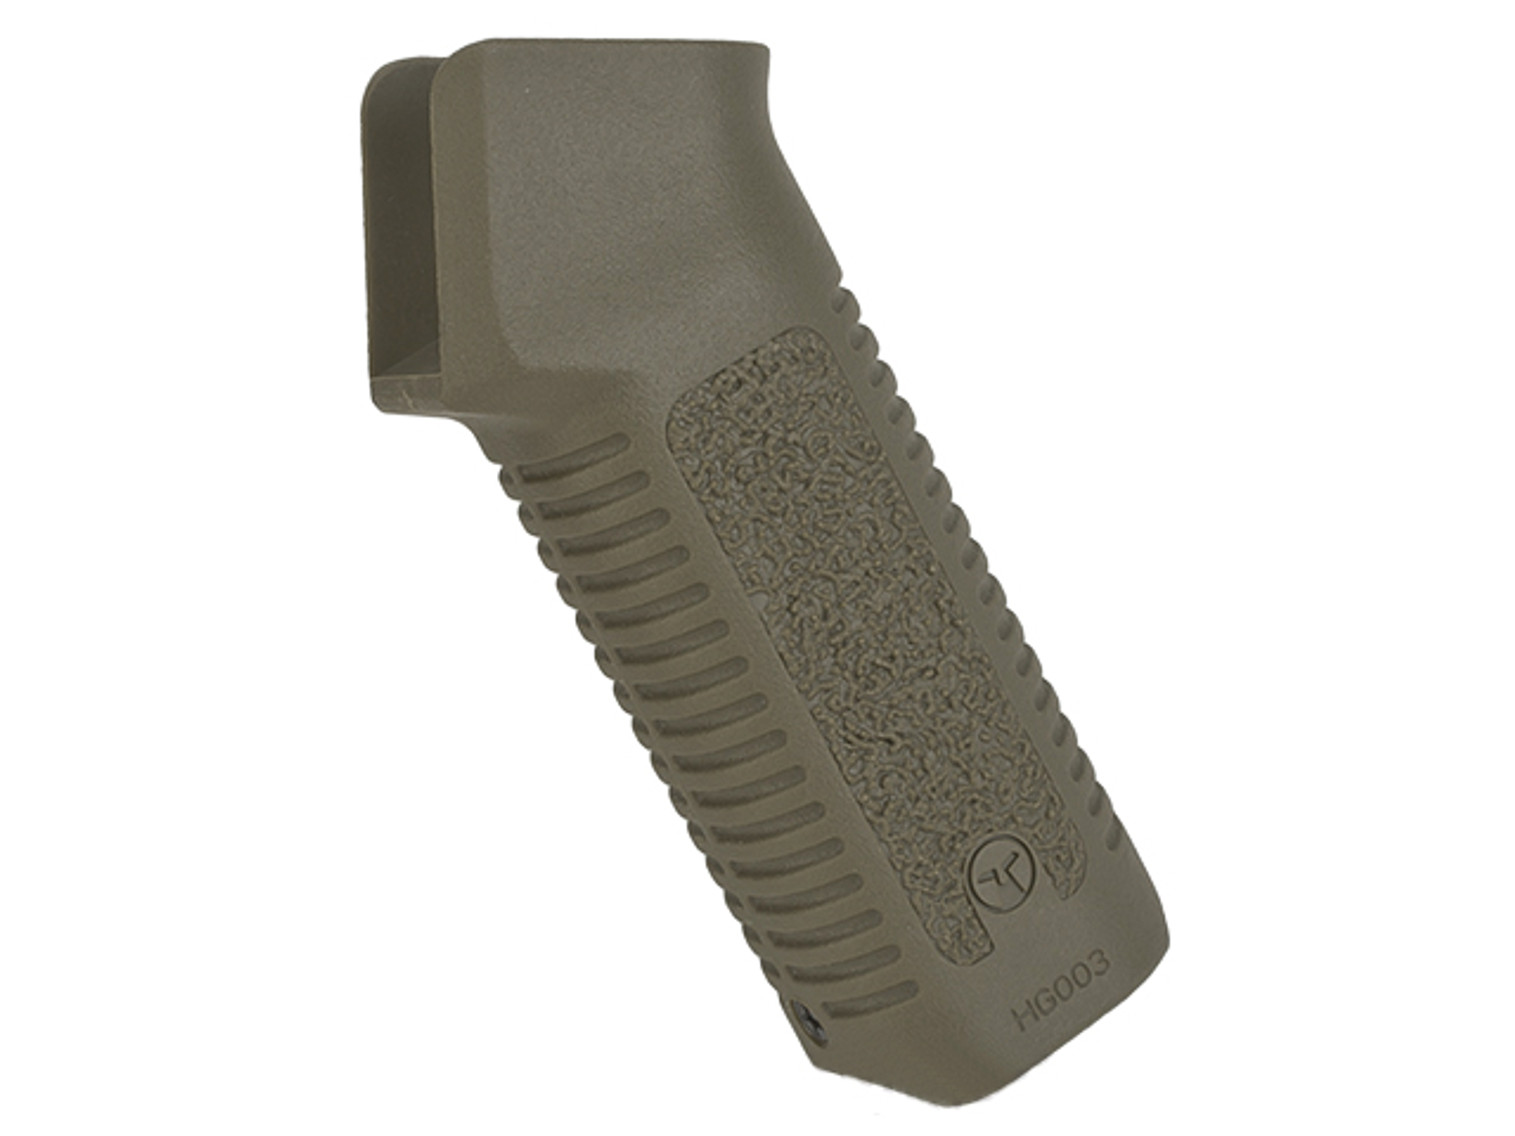 ARES Amoeba Airsoft Type-3 Low Profile Motor Grip for M4/m16 Airsoft AEG Rifles - Dark Earth